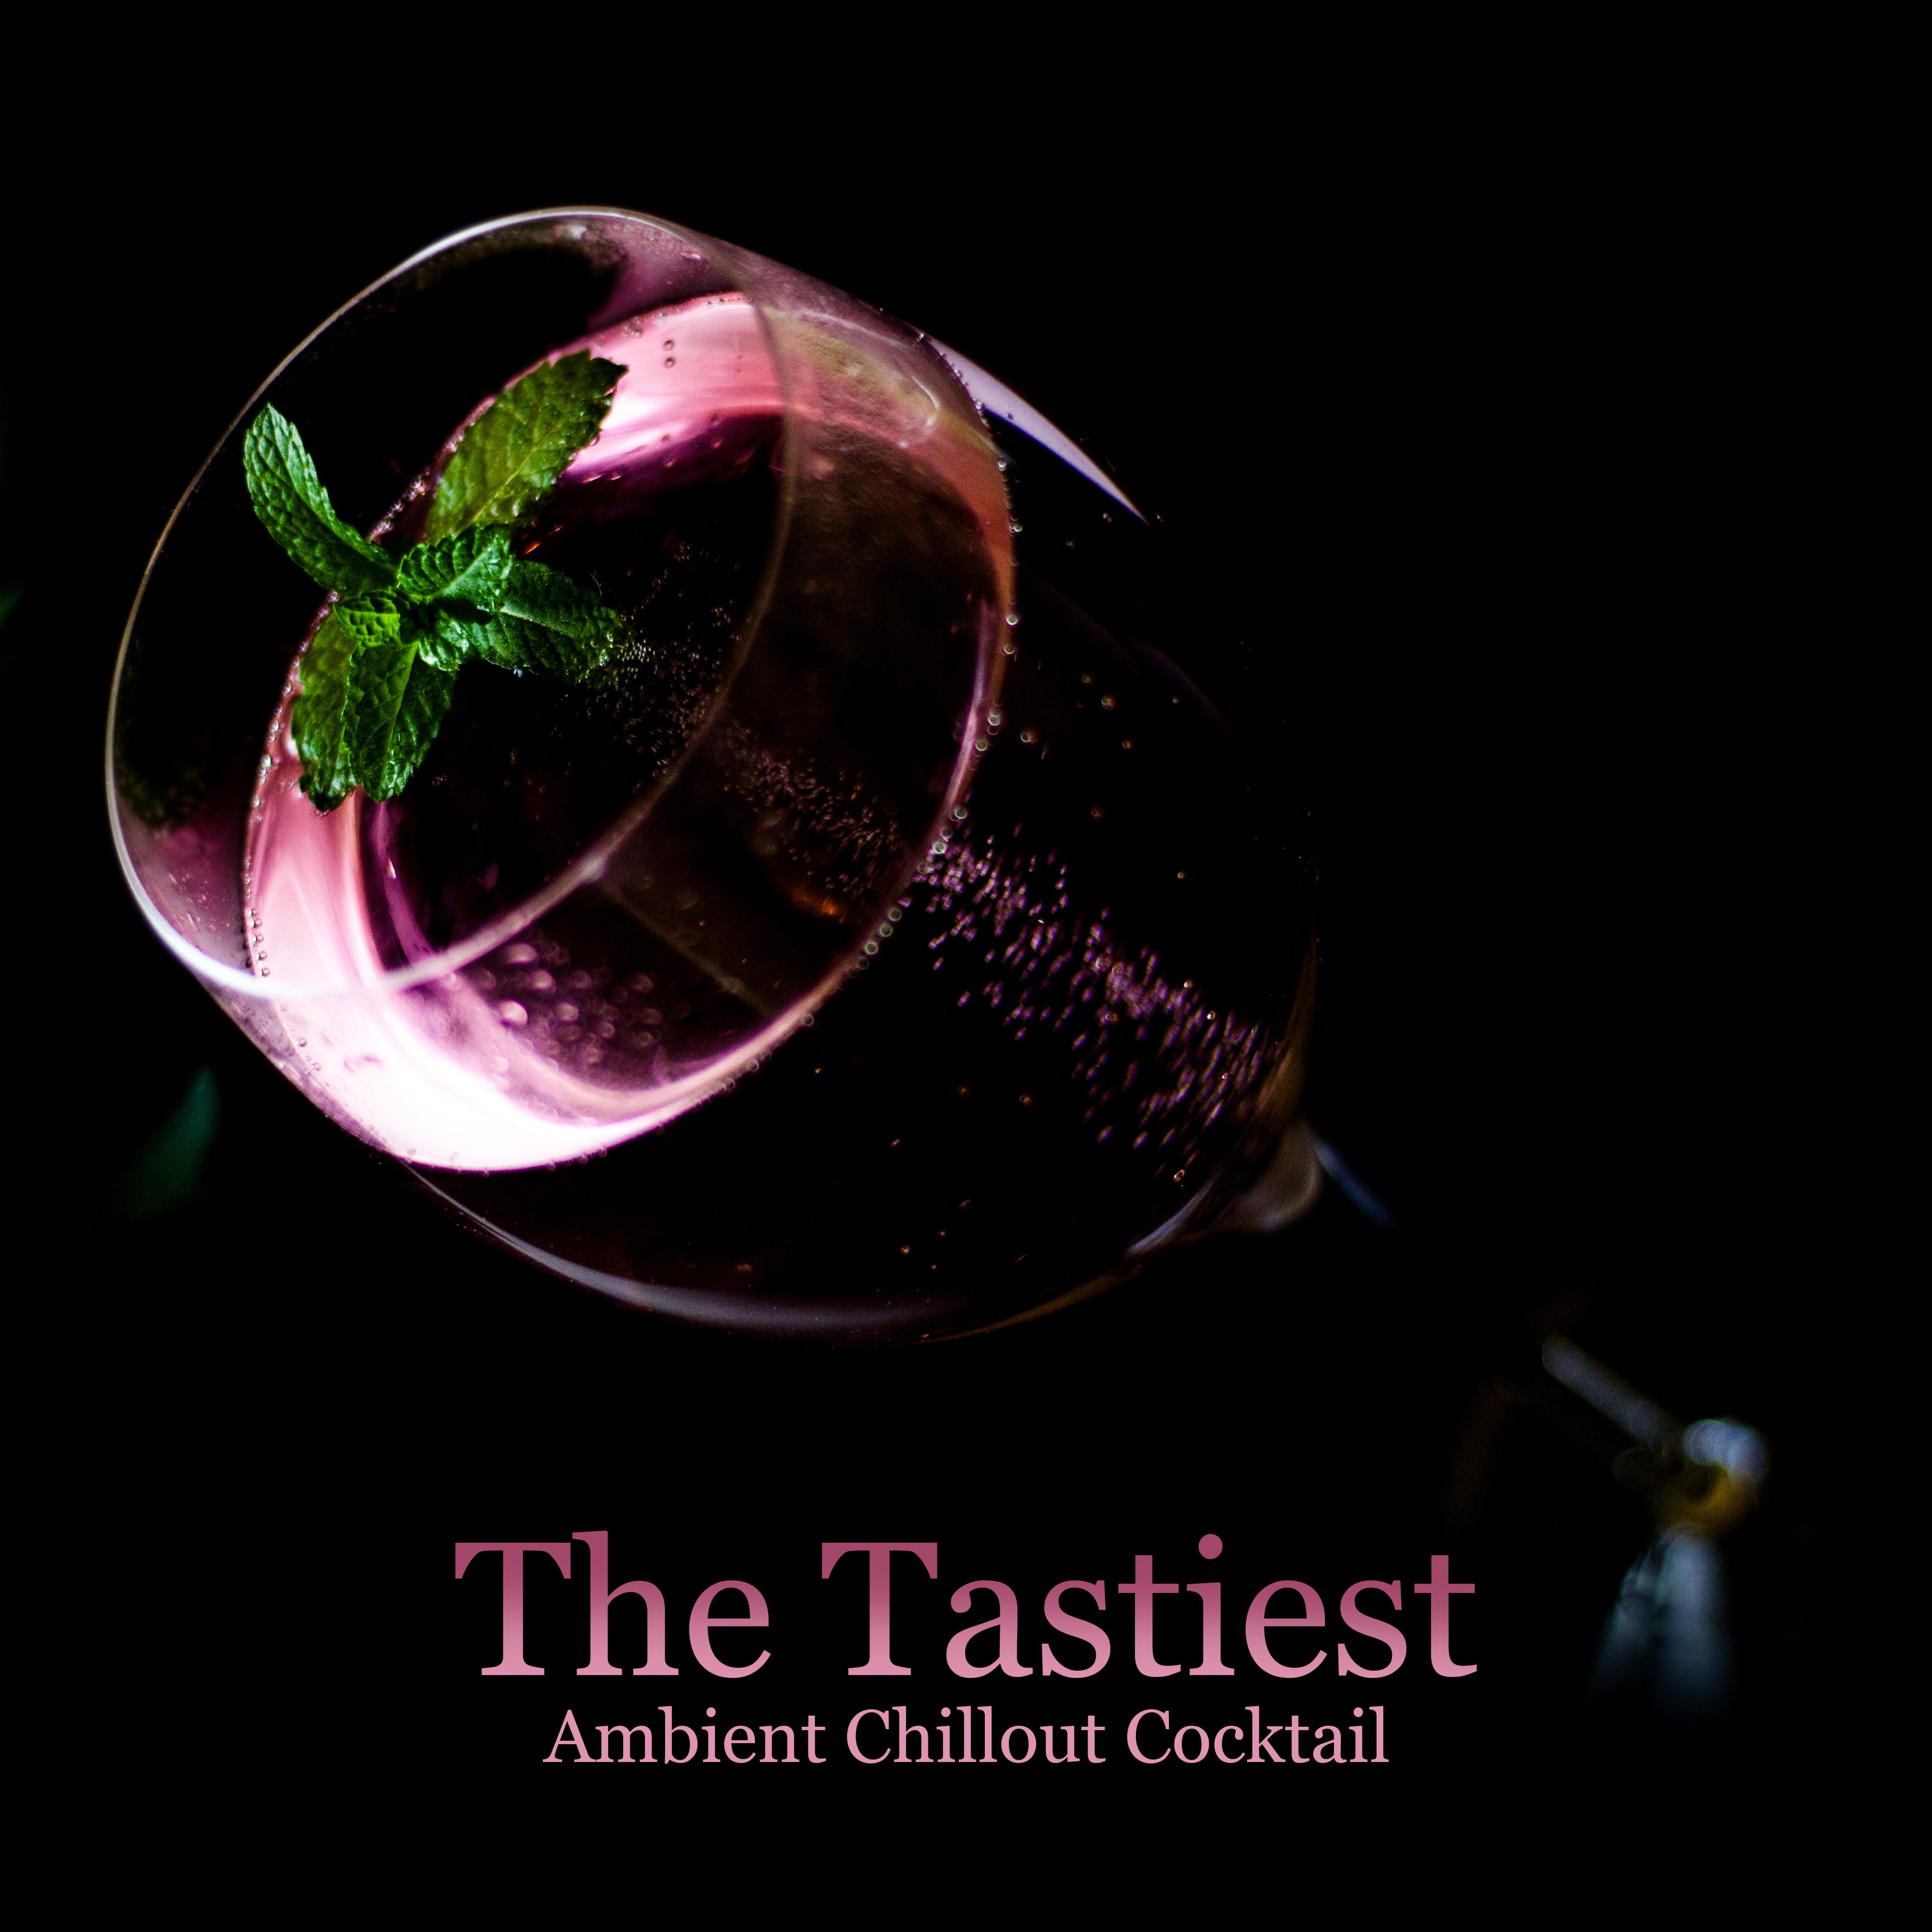 The Tastiest Ambient Chillout Cocktail: 2019 Most Beautiful Chill Out Slow Music for Total Relax, Calming Down, Fight with Stress, Summer Vacation Perfect Rest on the Beach